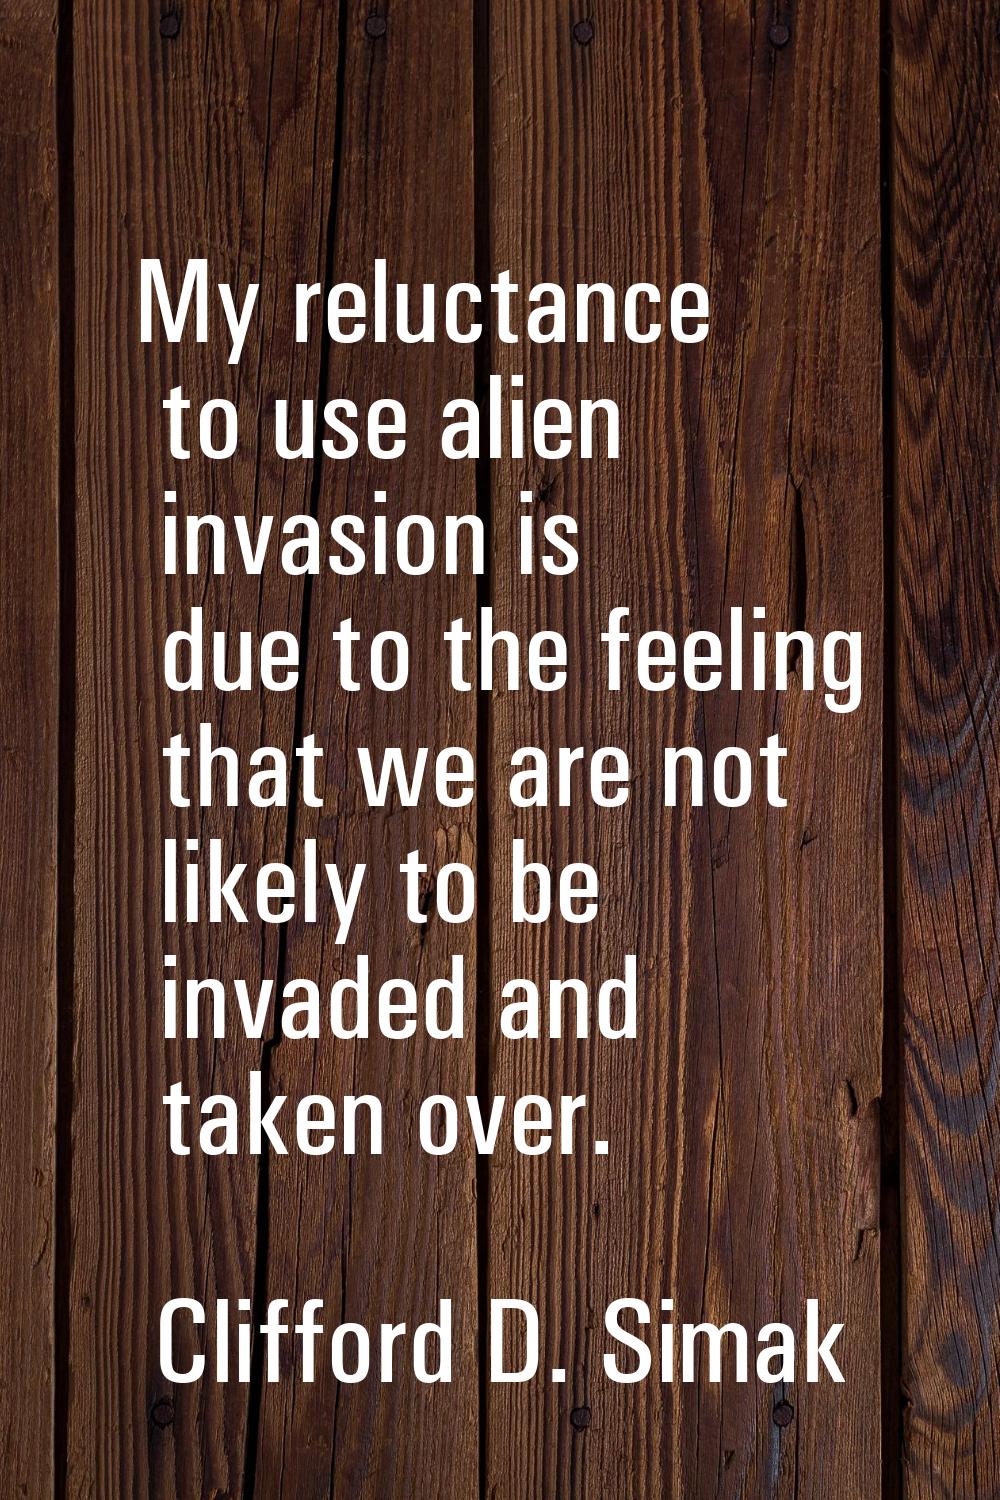 My reluctance to use alien invasion is due to the feeling that we are not likely to be invaded and 